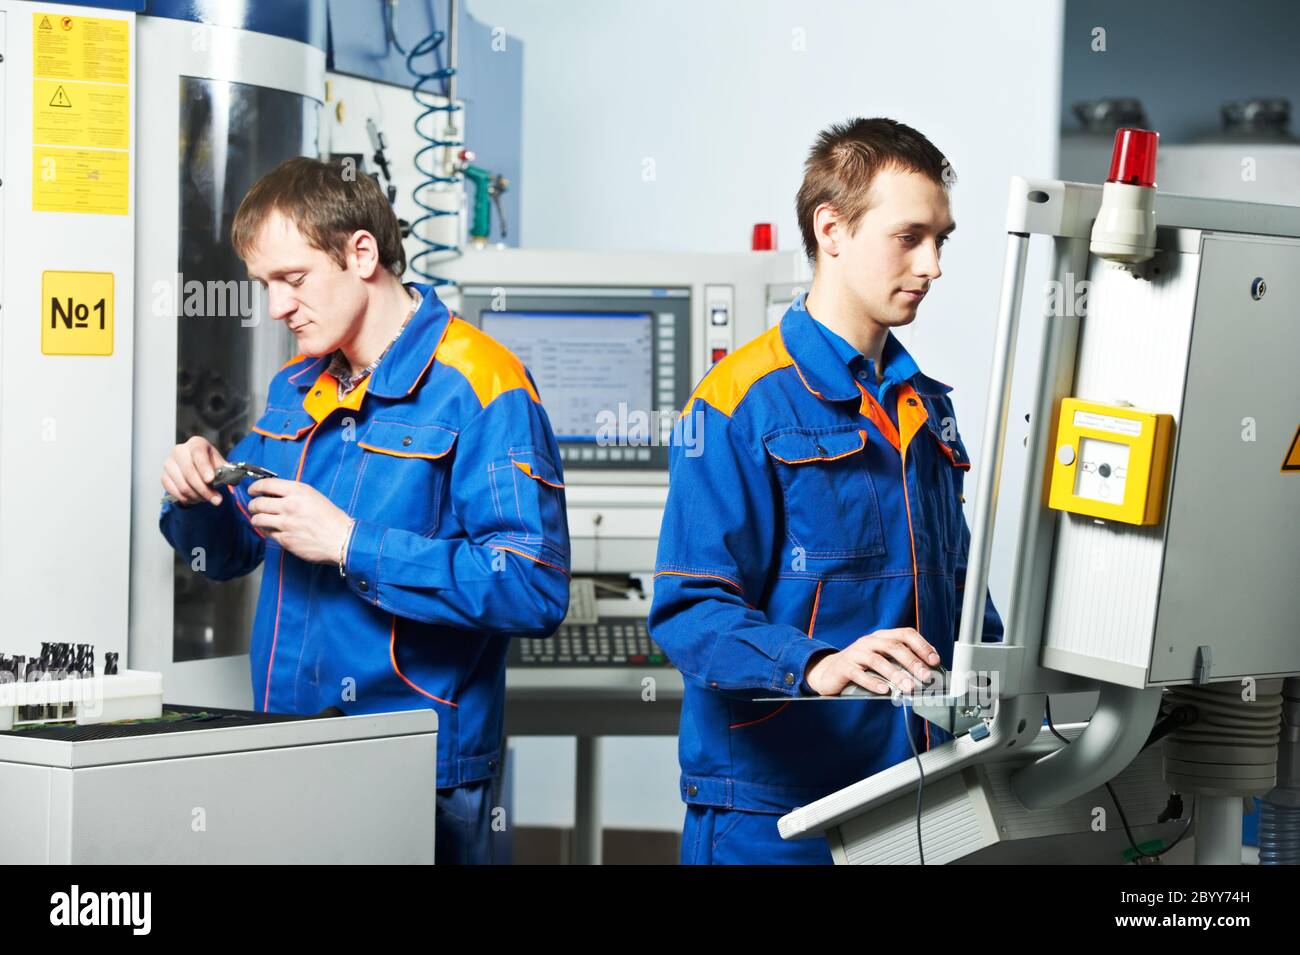 two workers at tool workshop Stock Photo